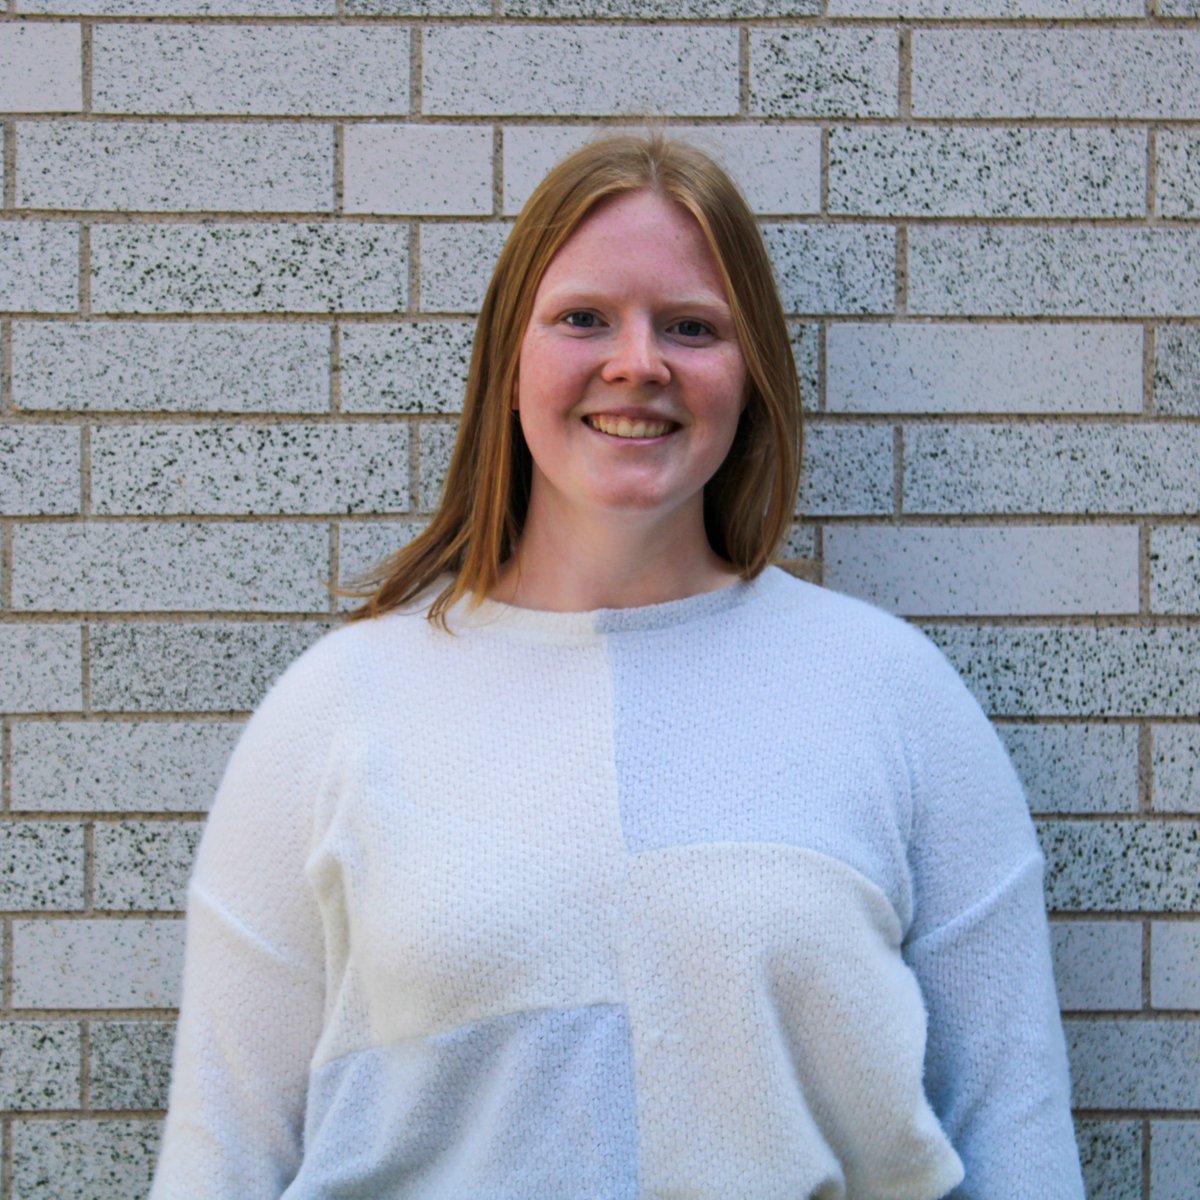 One of @NUTrypkiller labs talented #undergrads was awarded the American Institute Chemistry student award! This award recognizes @SwLydia's record of leadership and scholarly achievement. To top it off, she accepted a PhD position @UWMadison, congratulations! @NU_Chemistry👏